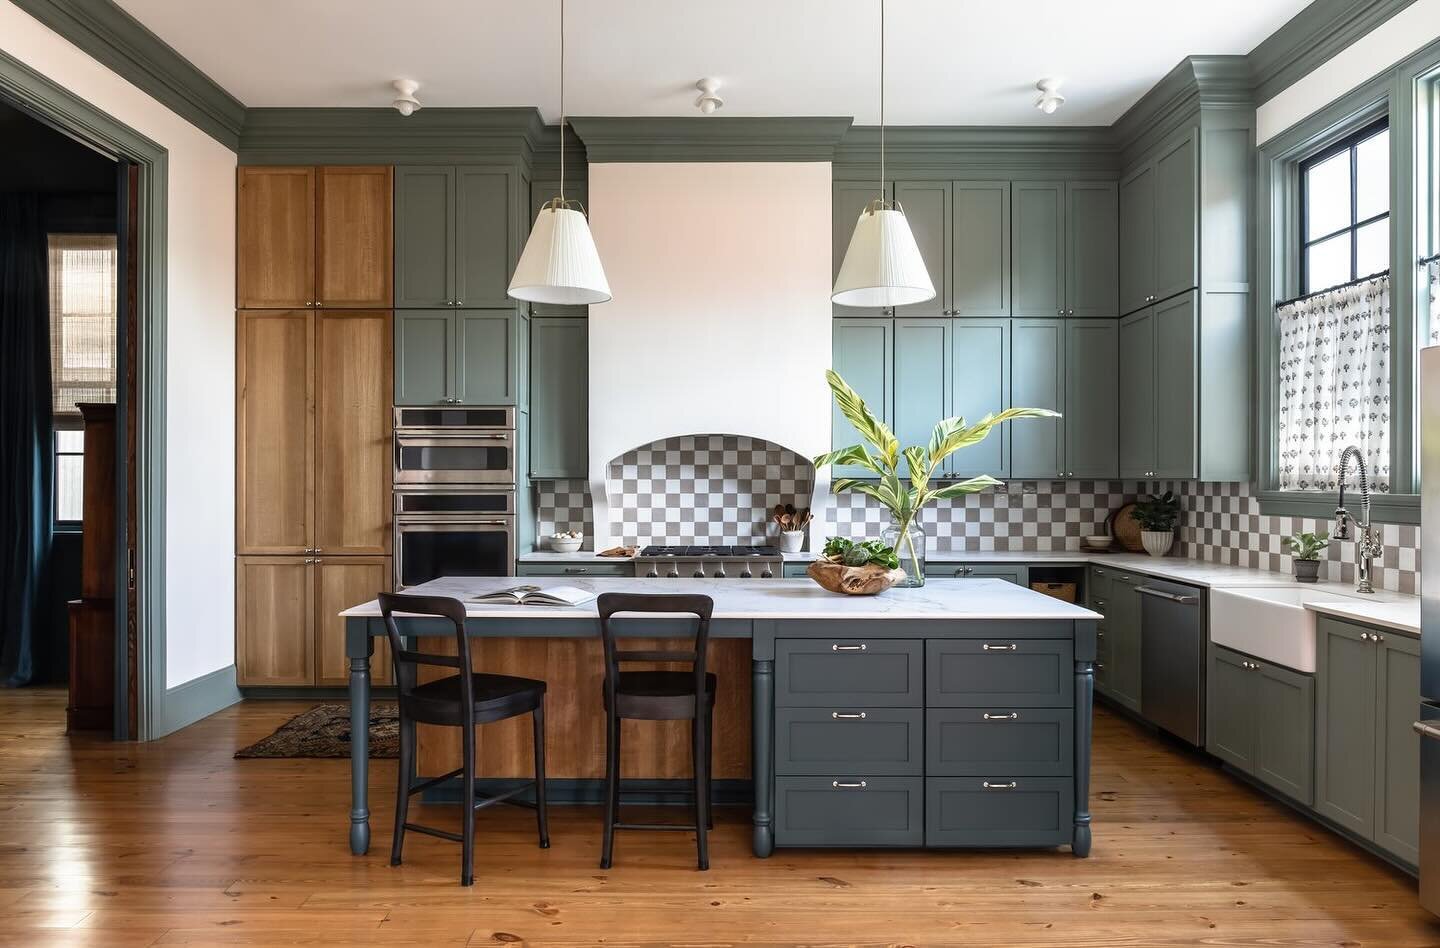 We opted for a casual yet luxurious eat-in kitchen at St Thomas Street. A checkered tile backsplash adds whimsy under a custom designed hood vent. White oak panels on the island and hidden pantry cupboard modernize the look while serving a practical 